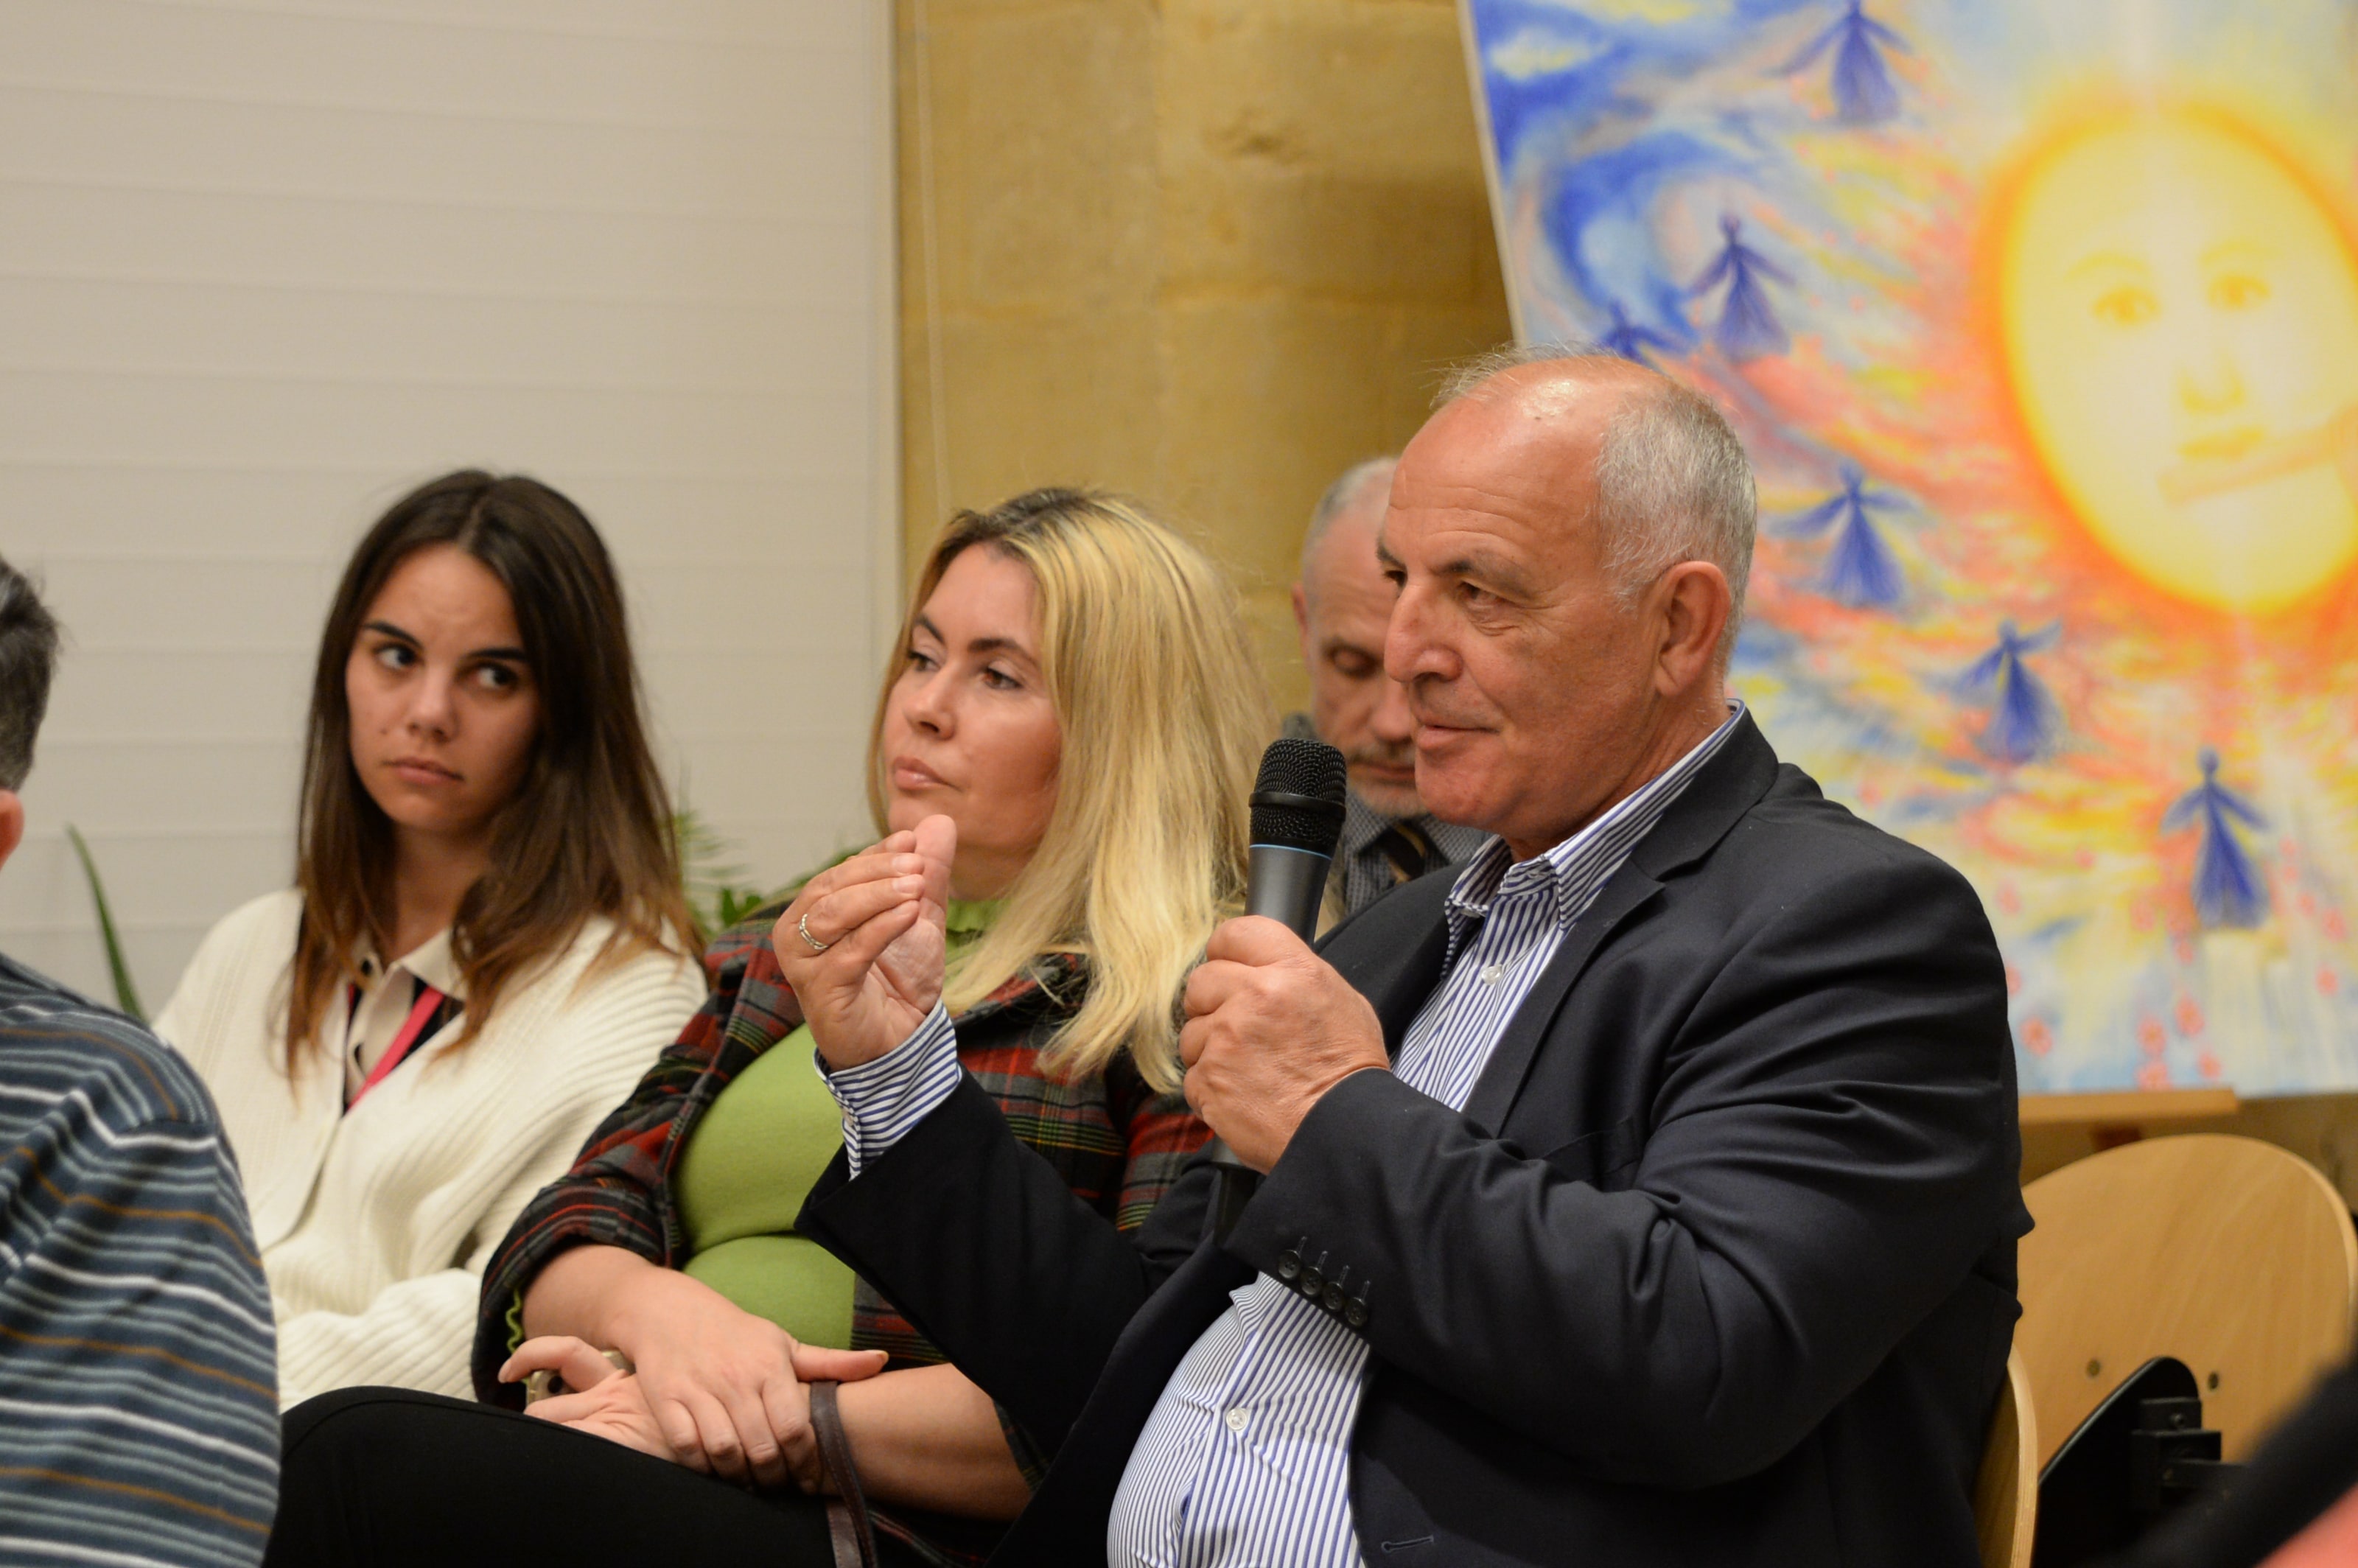 The audience asking questions at the "Internal Worlds, External Relations" event